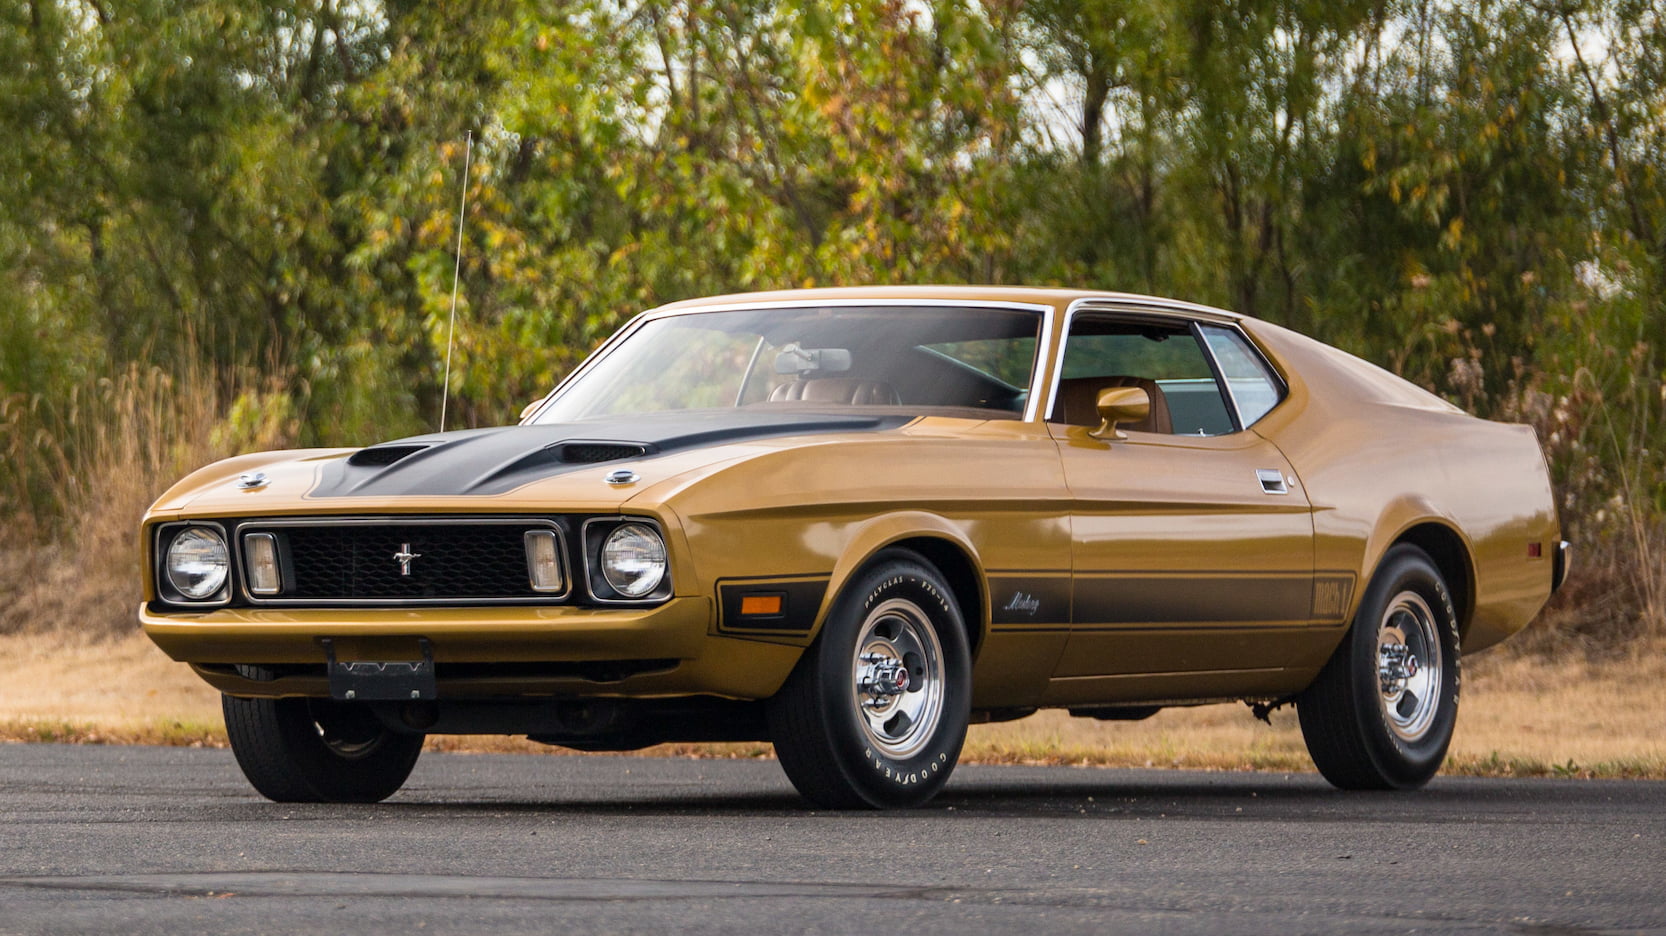 Mustang Of The Day: 1974 Ford Mustang Mach 1